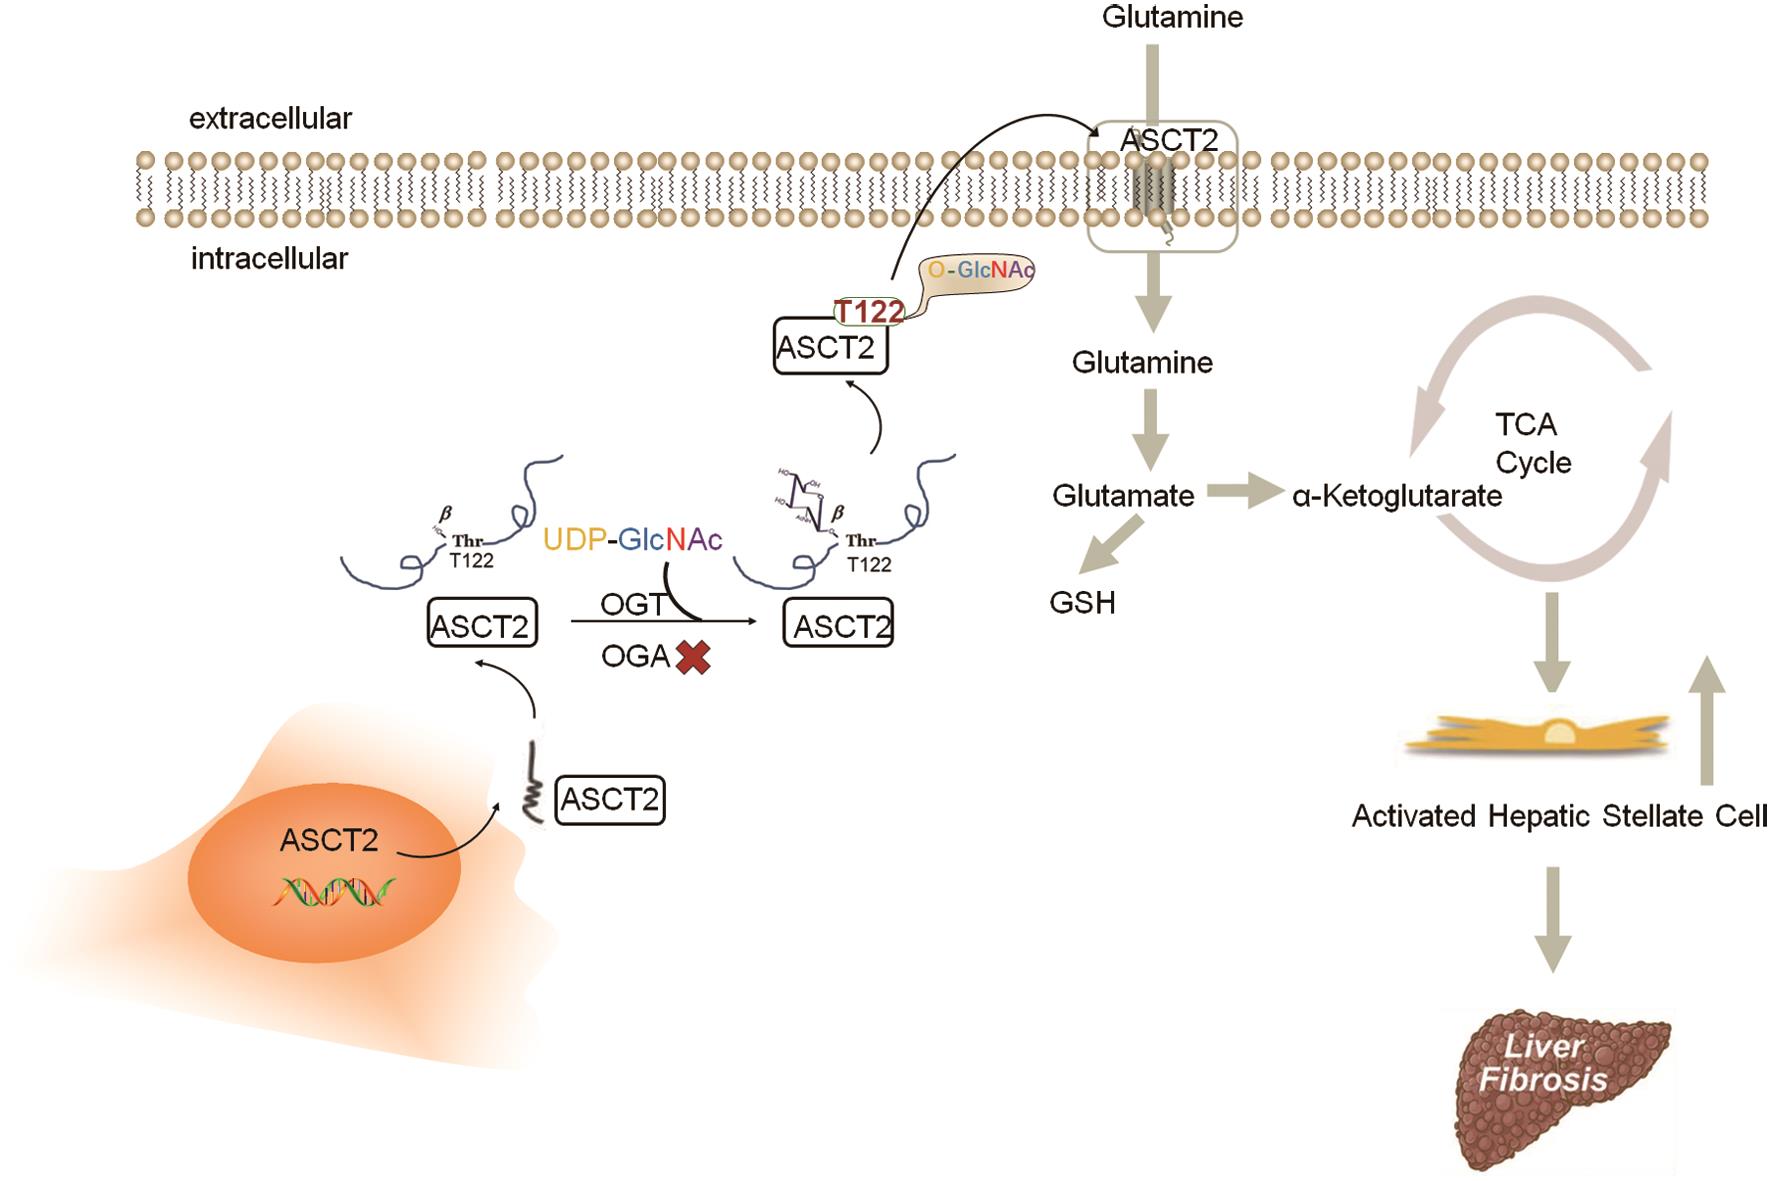 Schematic illustration of the molecular mechanism underlying the role of ASCT2 <italic>O</italic>-GlcNAcylation in HSC activation and liver fibrosis.